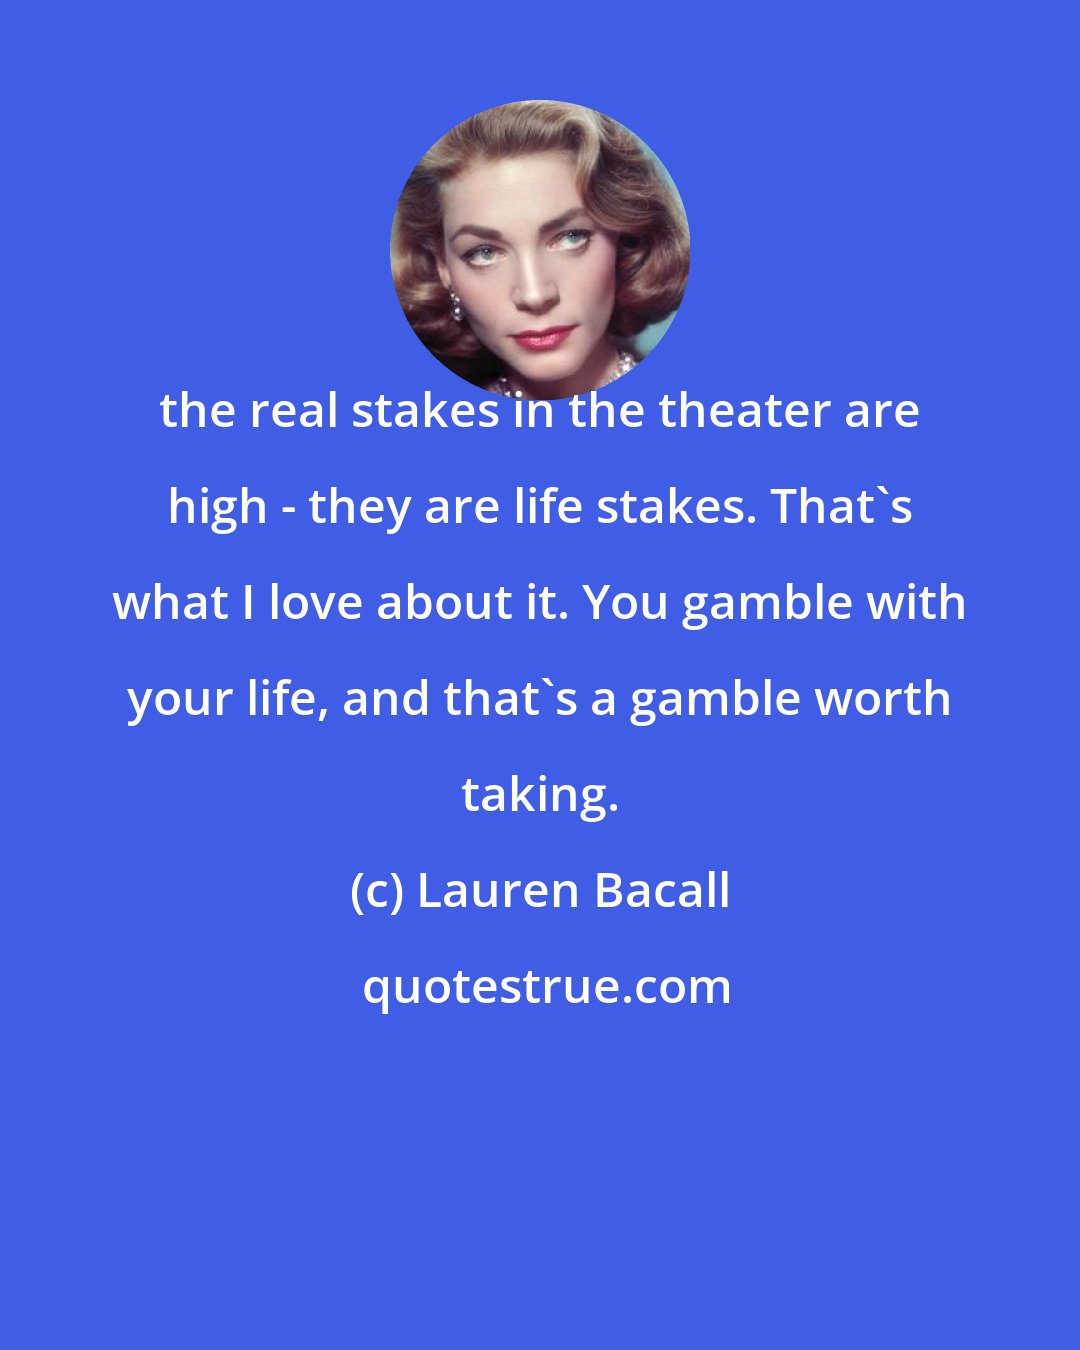 Lauren Bacall: the real stakes in the theater are high - they are life stakes. That's what I love about it. You gamble with your life, and that's a gamble worth taking.